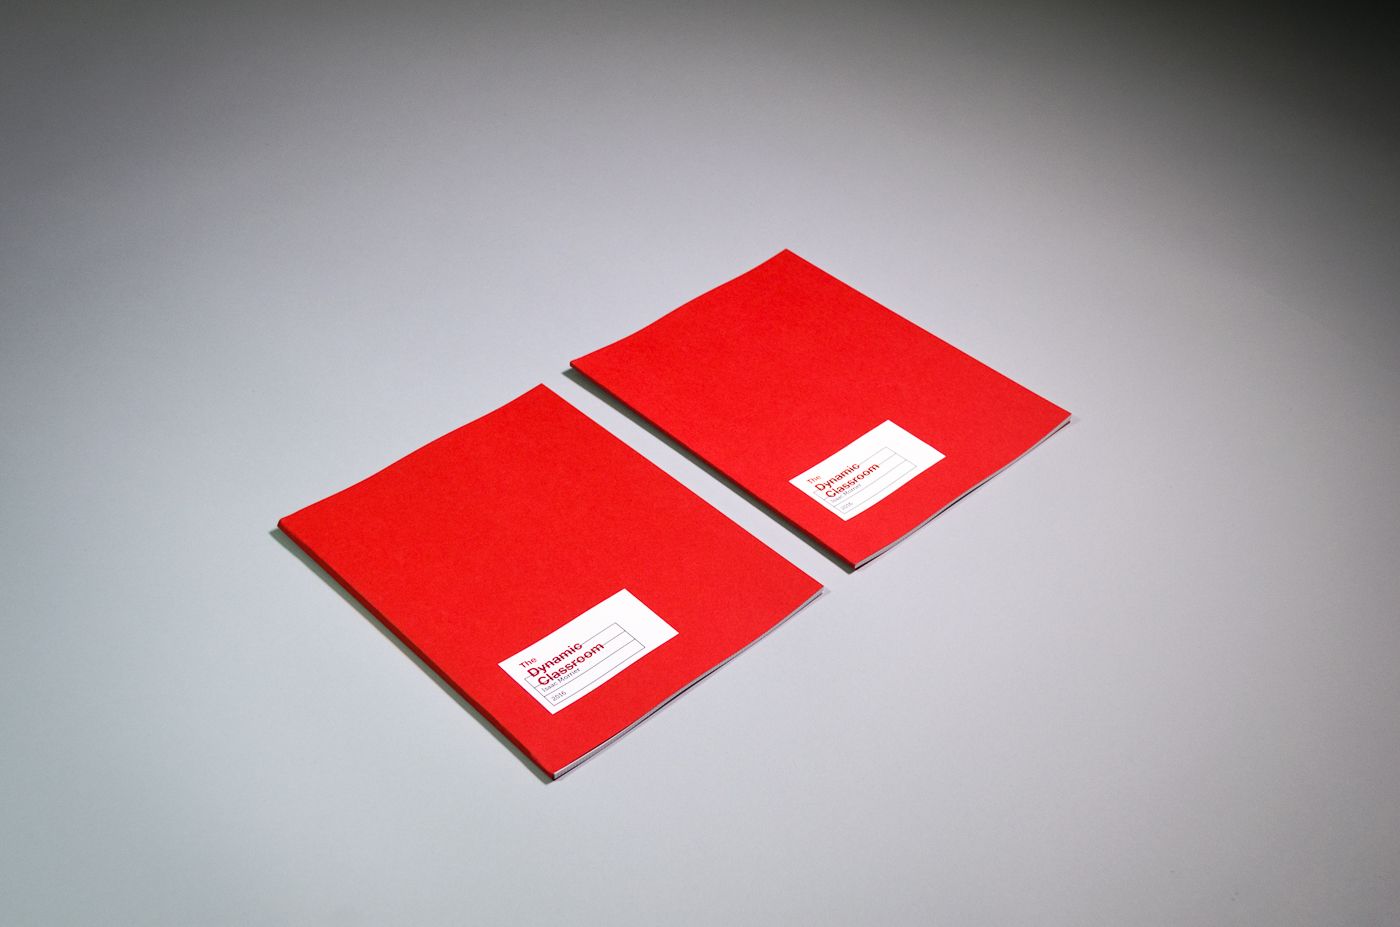 Two copies of the book. It measures about 8 inches wide by 10.5 inches tall. The cover is bright red matte paper. A small white label is adhered towards the bottom left corner. On it is printed a small black table of information, with “The Dynamic Classroom” overprinted in large red letters.